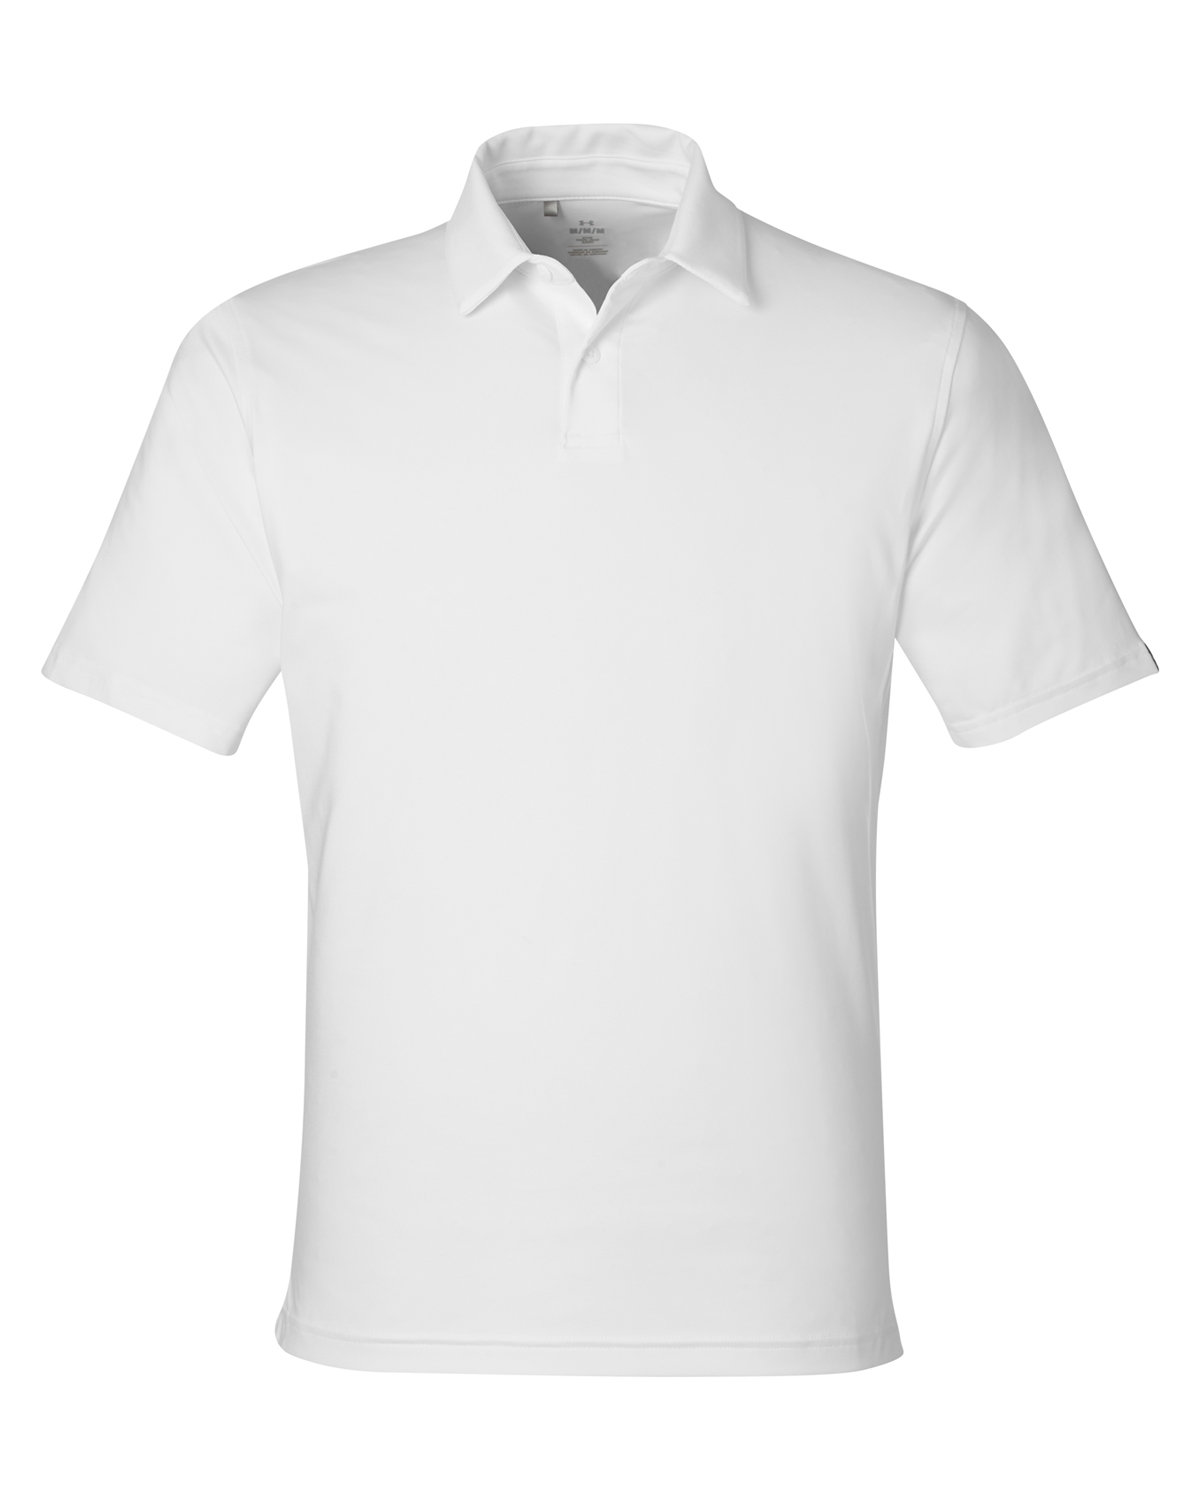 Under Armour 1383255 - Men's Recycled Polo